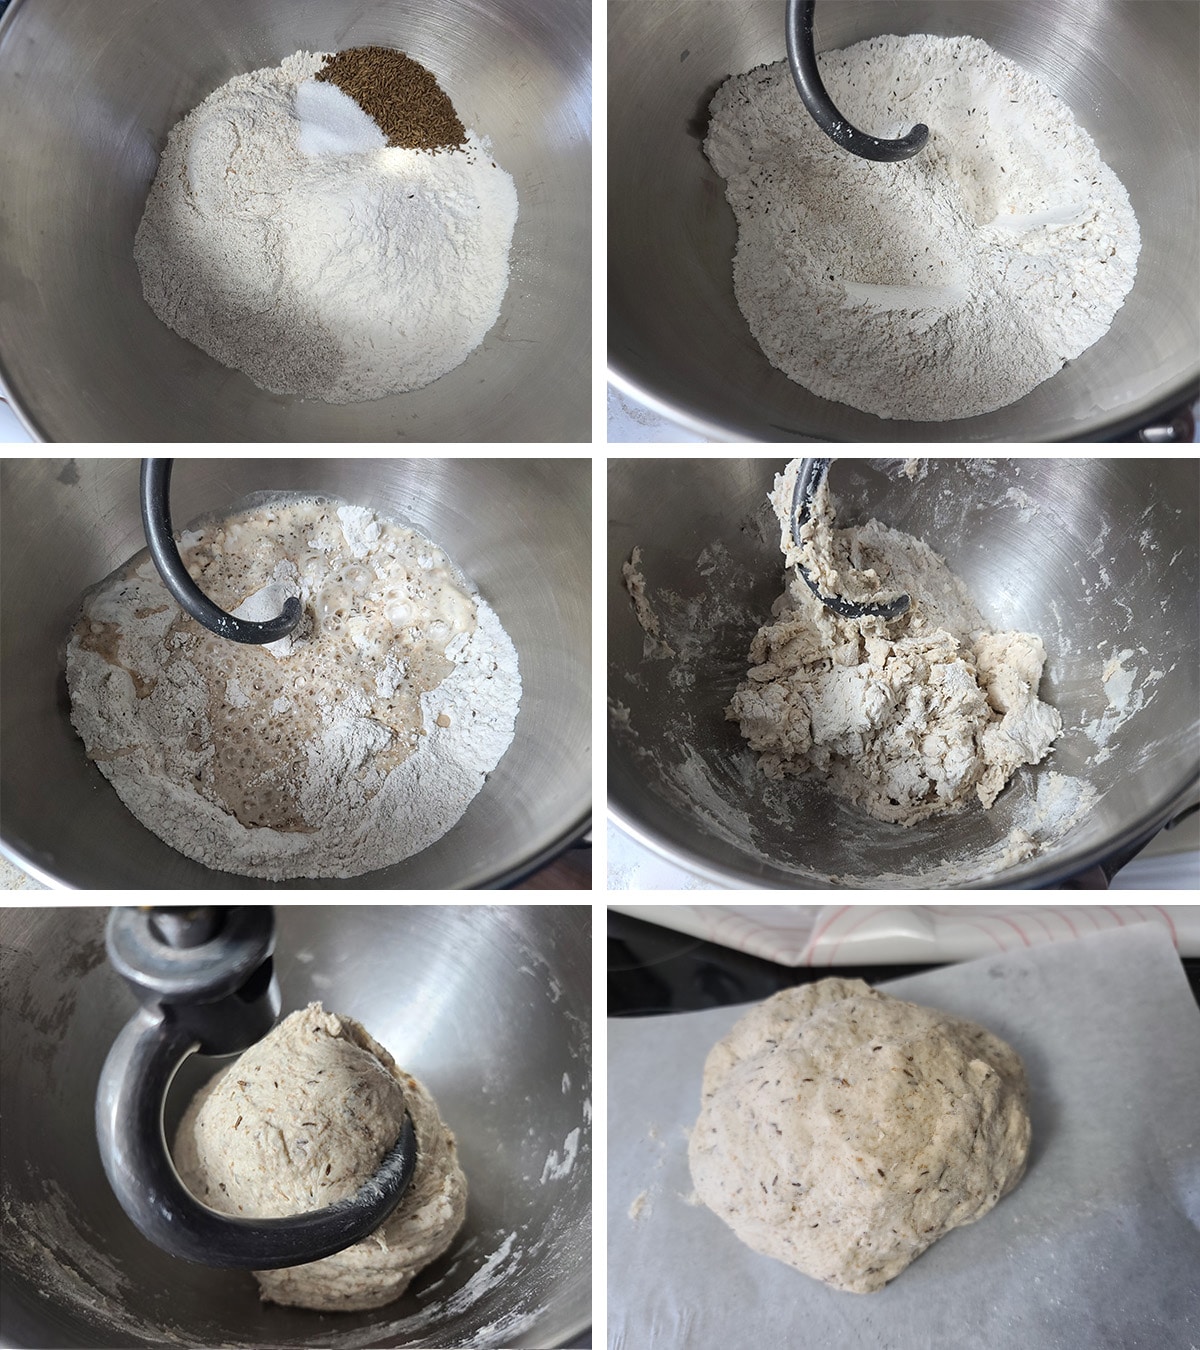 Flour and yeast mixture being mixed into a dough.